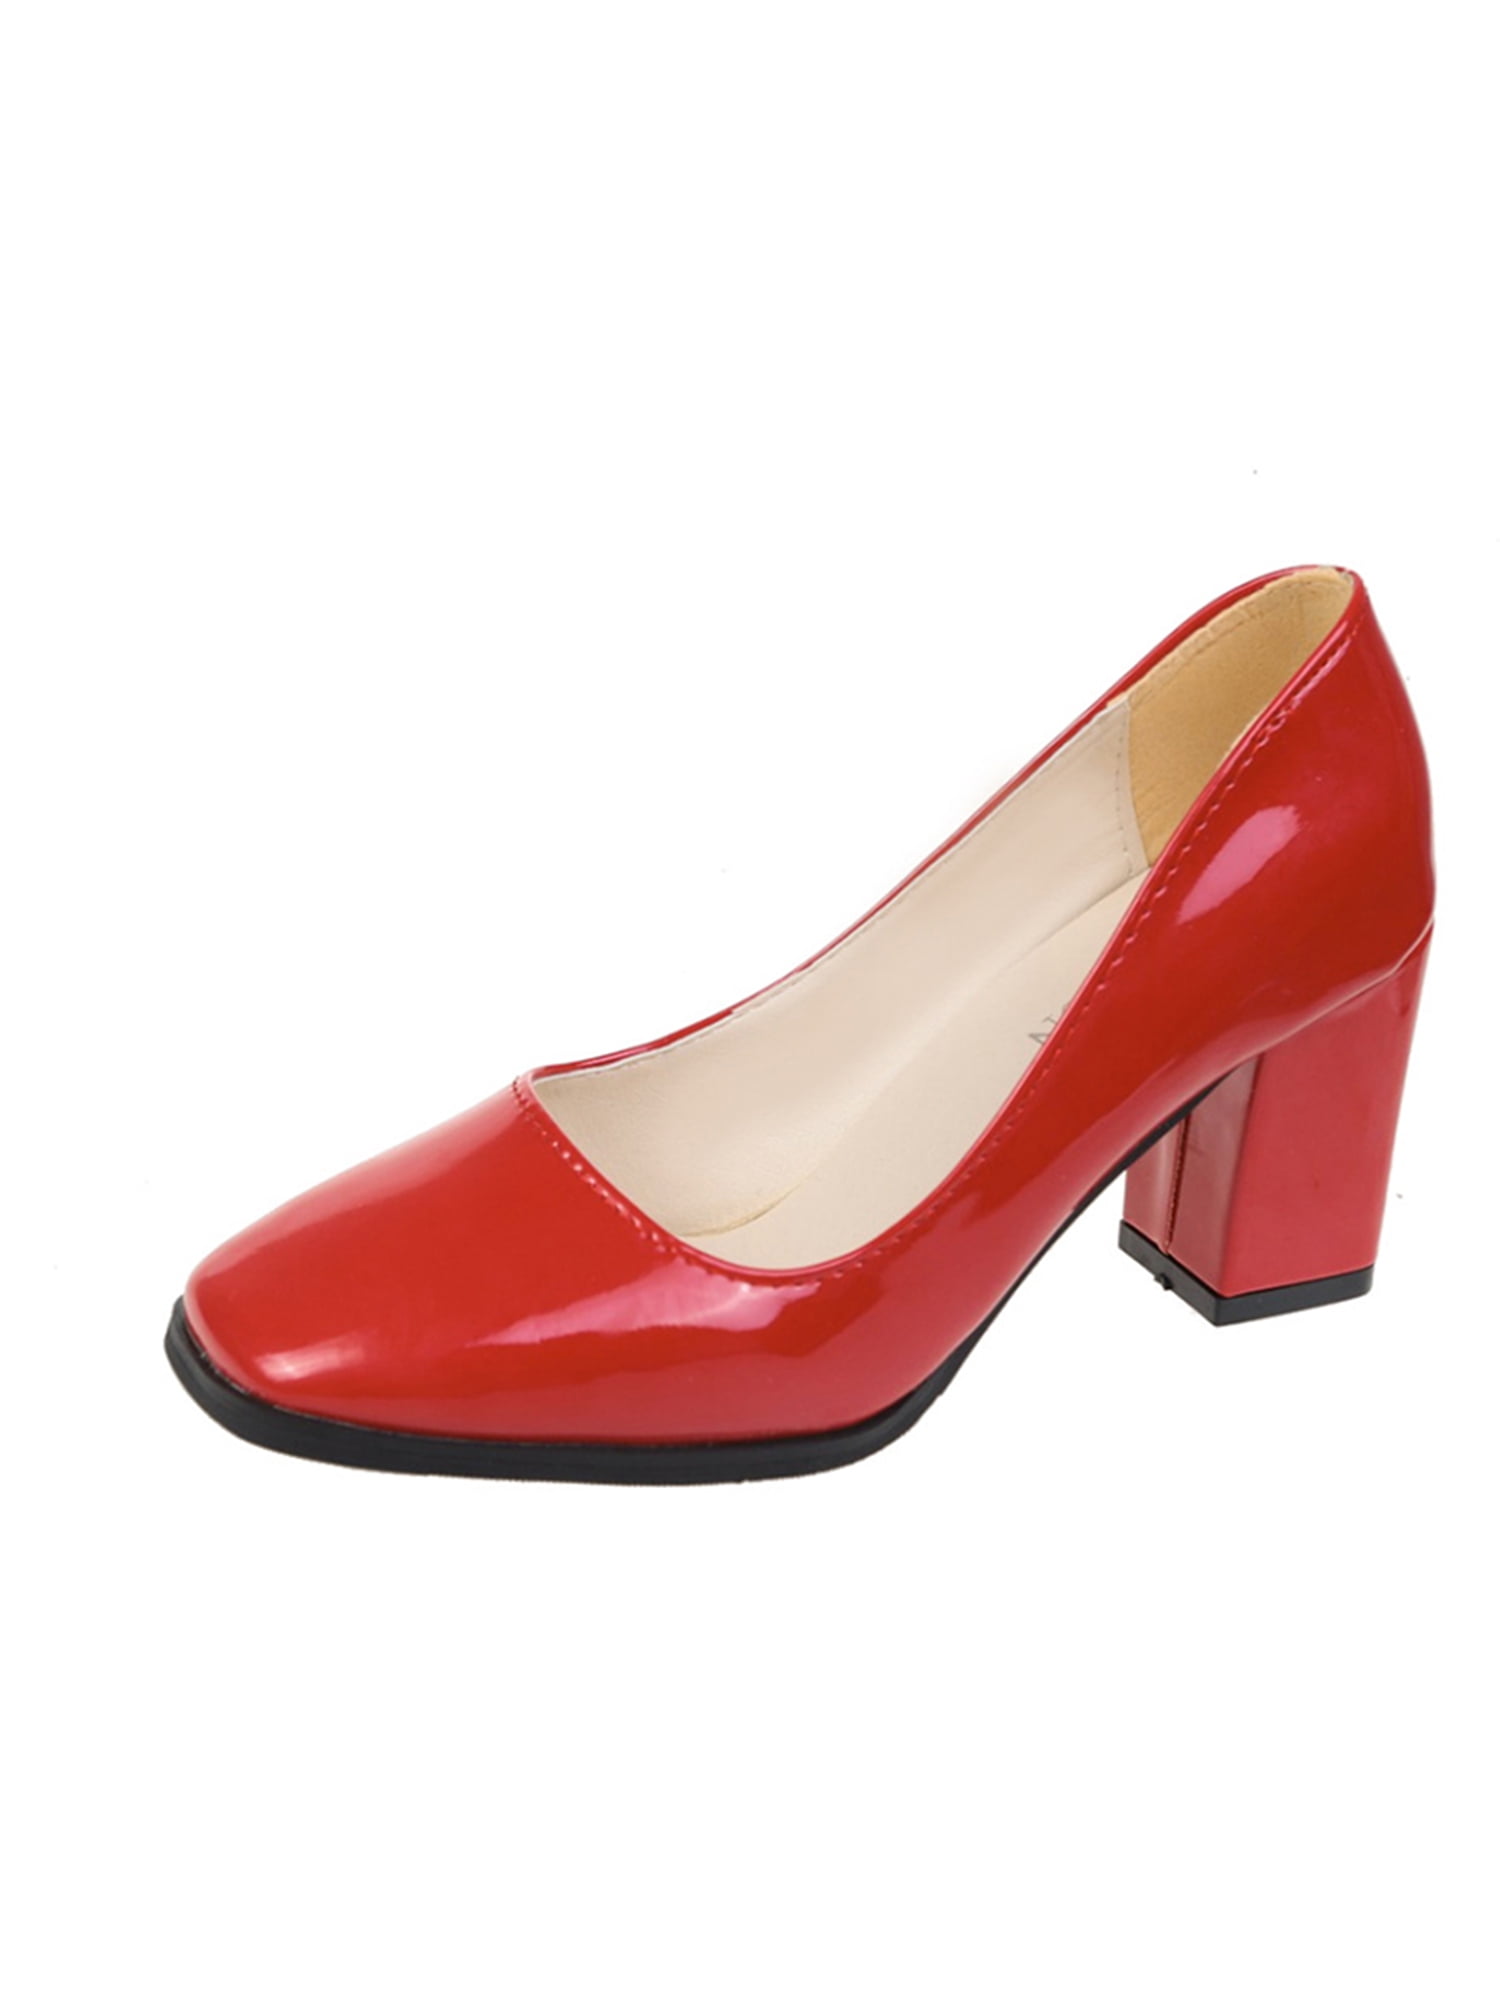 Bata Women Red Embellished Comfort Heels Price in India, Full  Specifications & Offers | DTashion.com